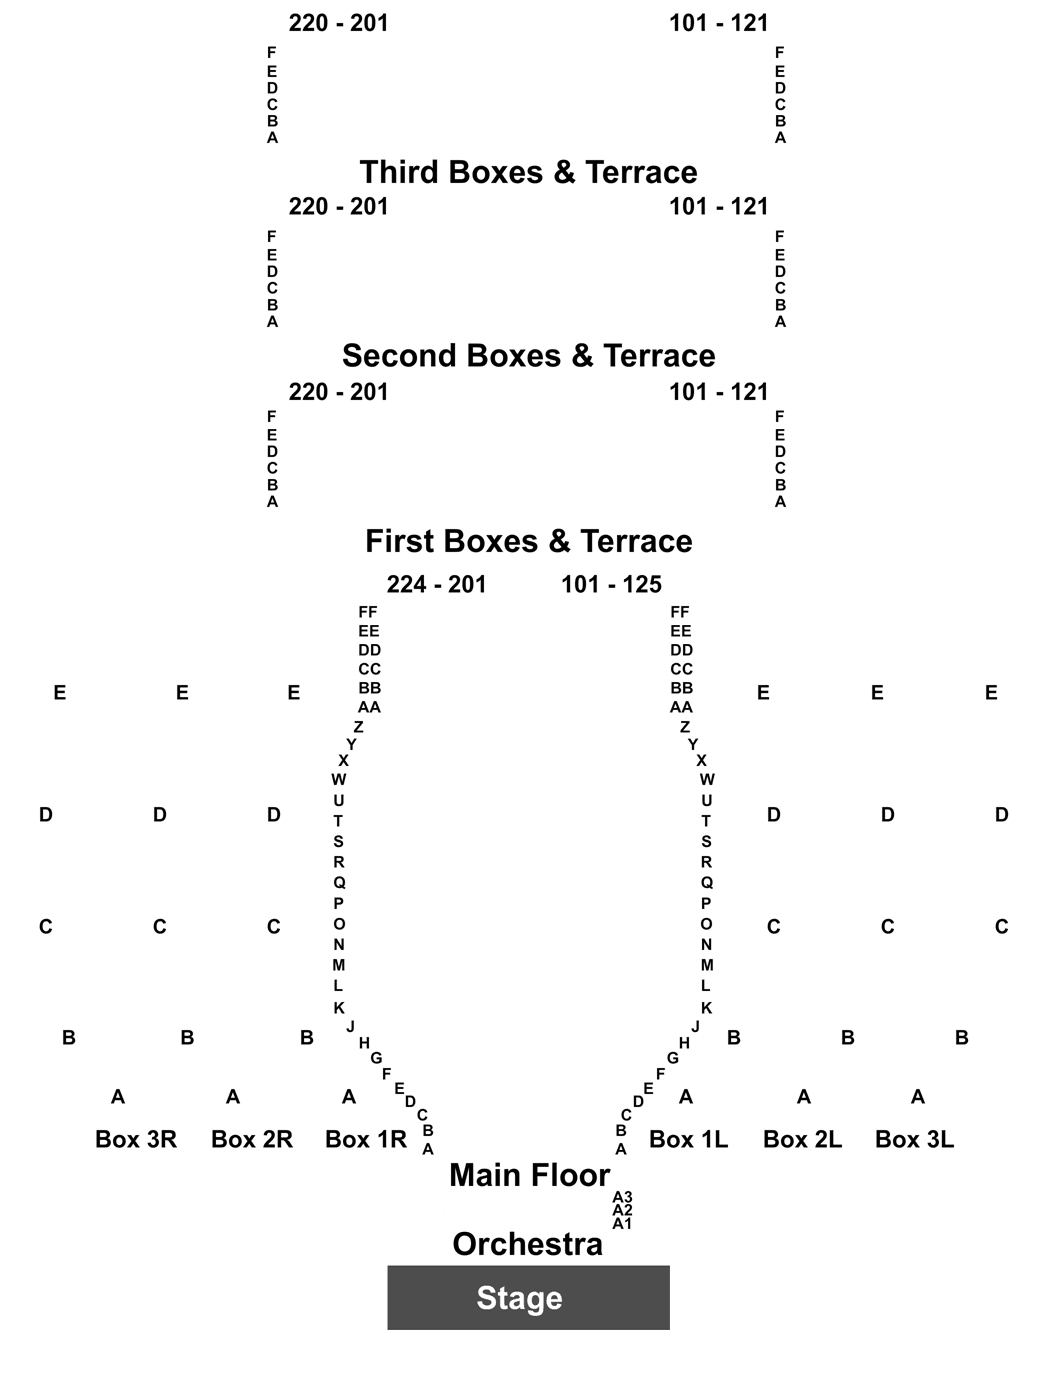 Clowes Hall Interactive Seating Chart